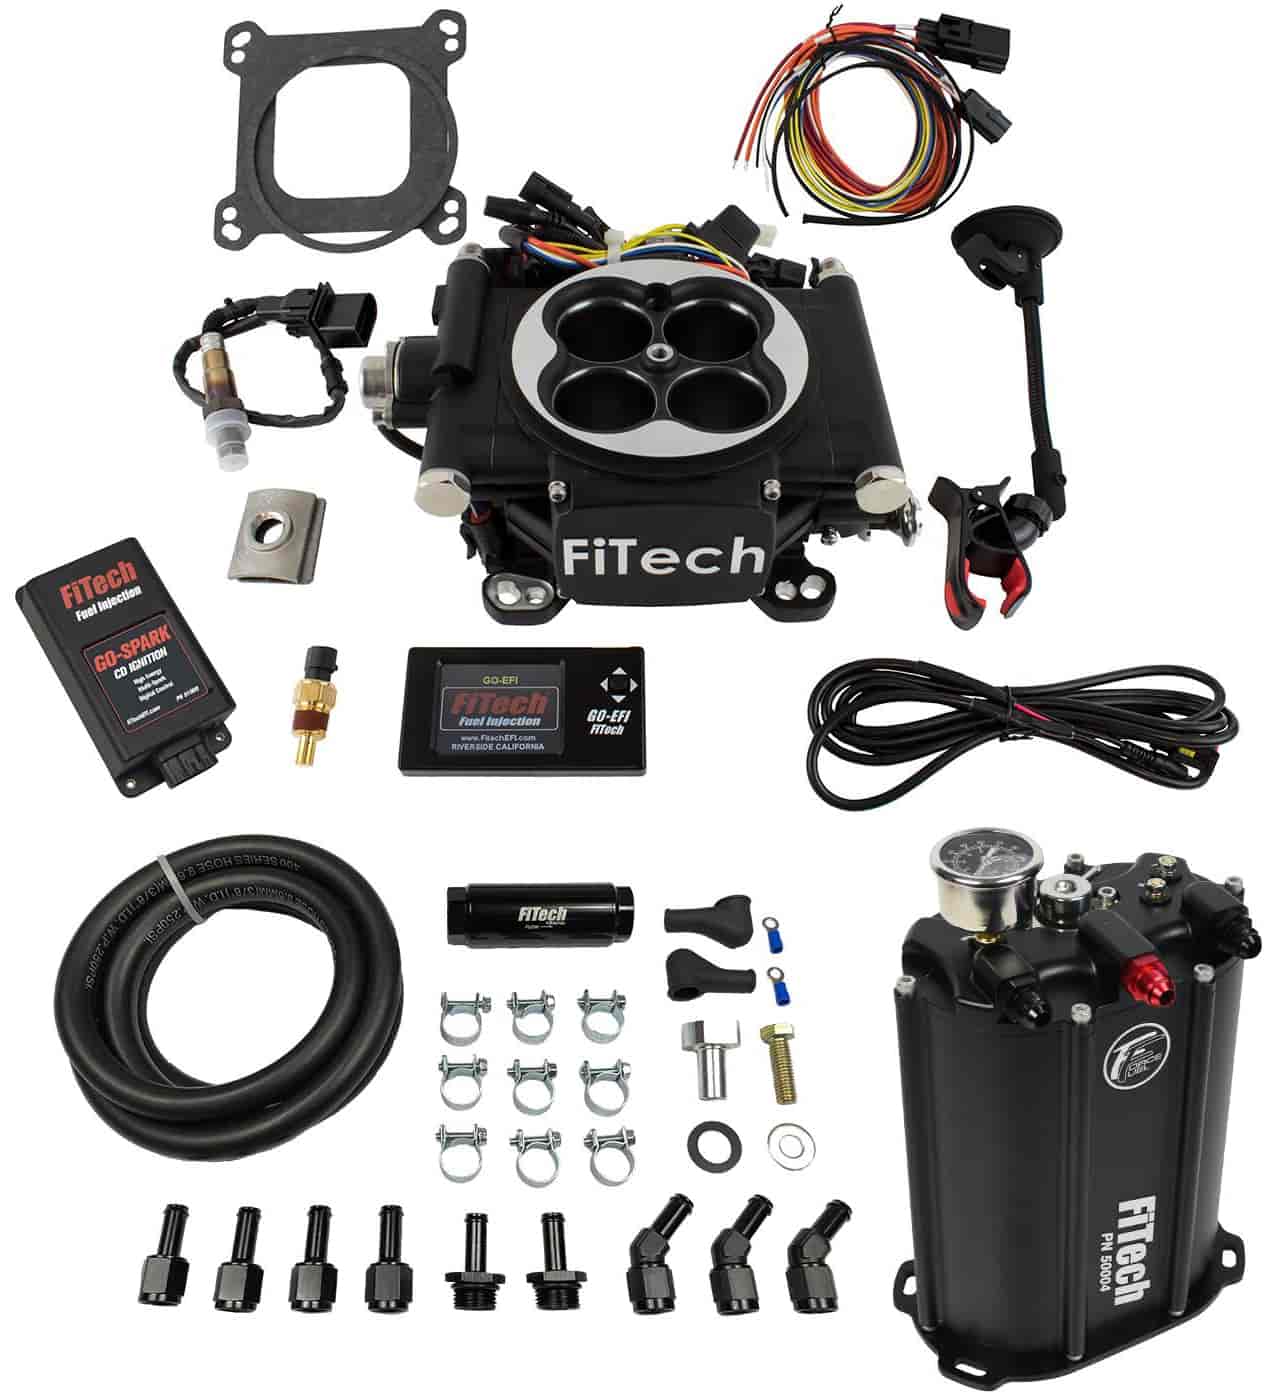 Go EFI-4 600 HP Throttle Body Fuel Injection Master Kit [with Force Fuel System & CDI Box] Matte Black